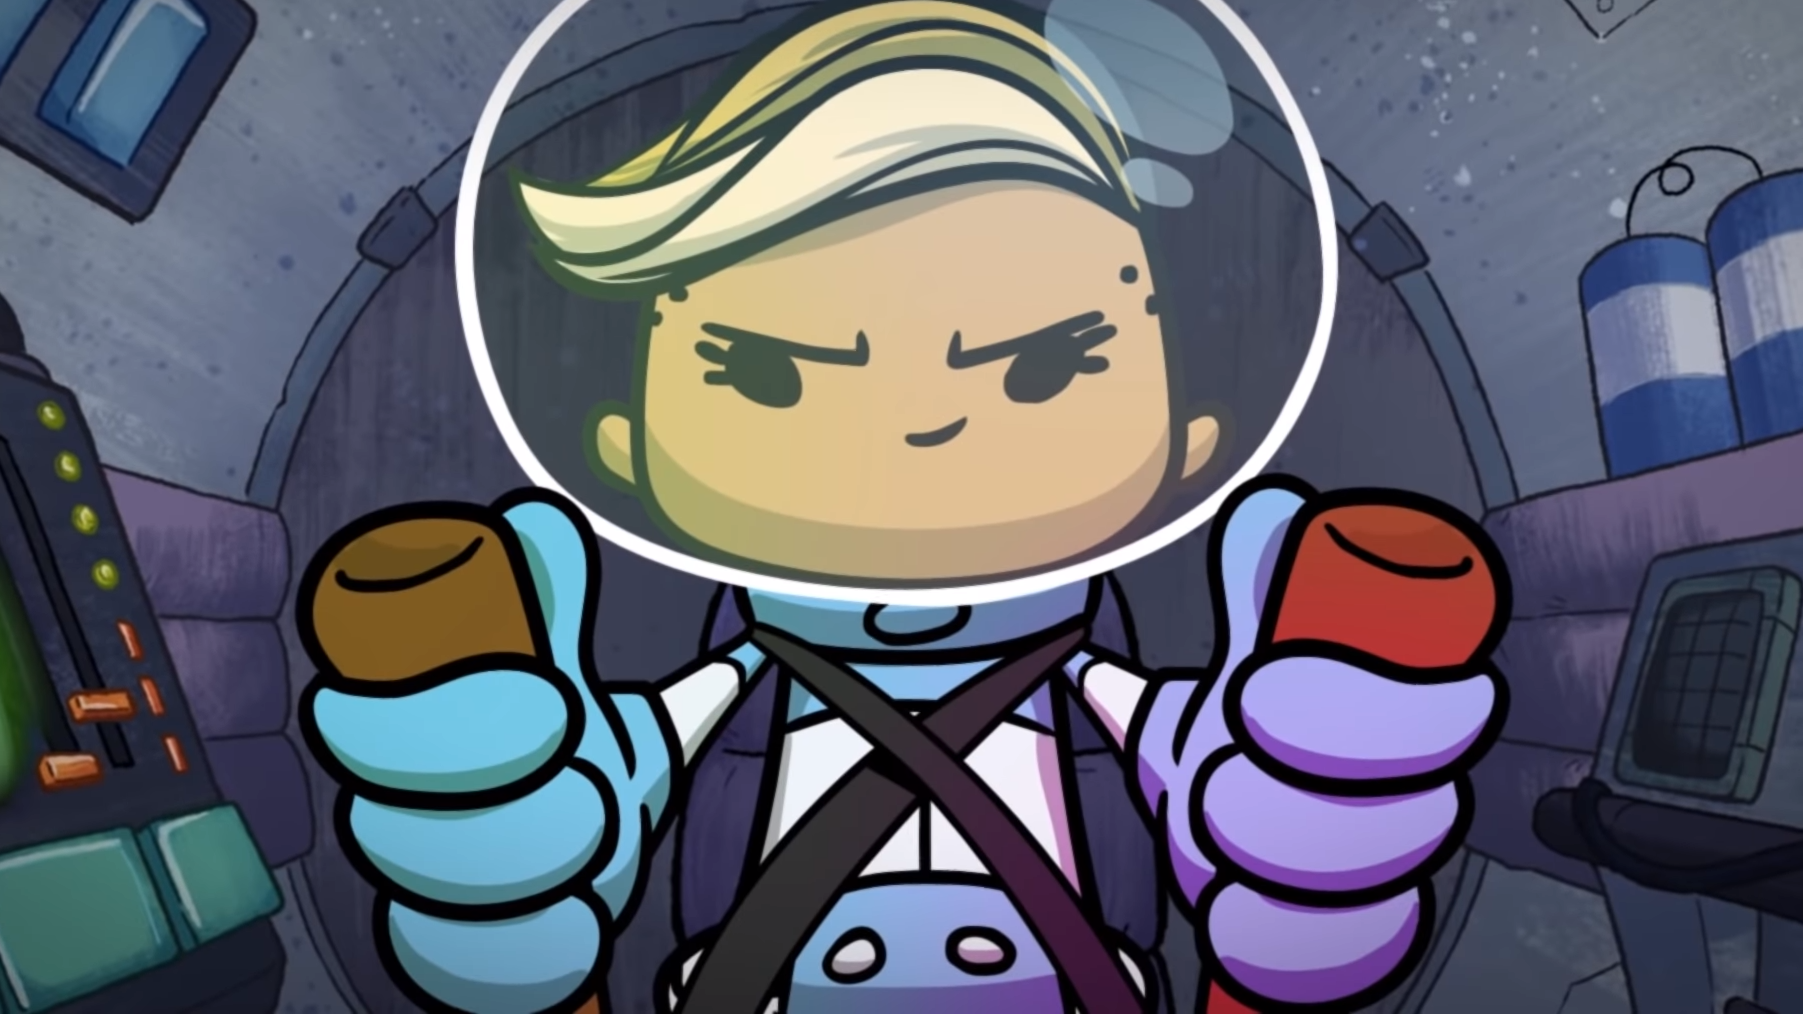 Https included ru. Оксиджен нот инклюдед. Oxygen not included Spaced out. Oxygen игра. Oxygen not included космос.